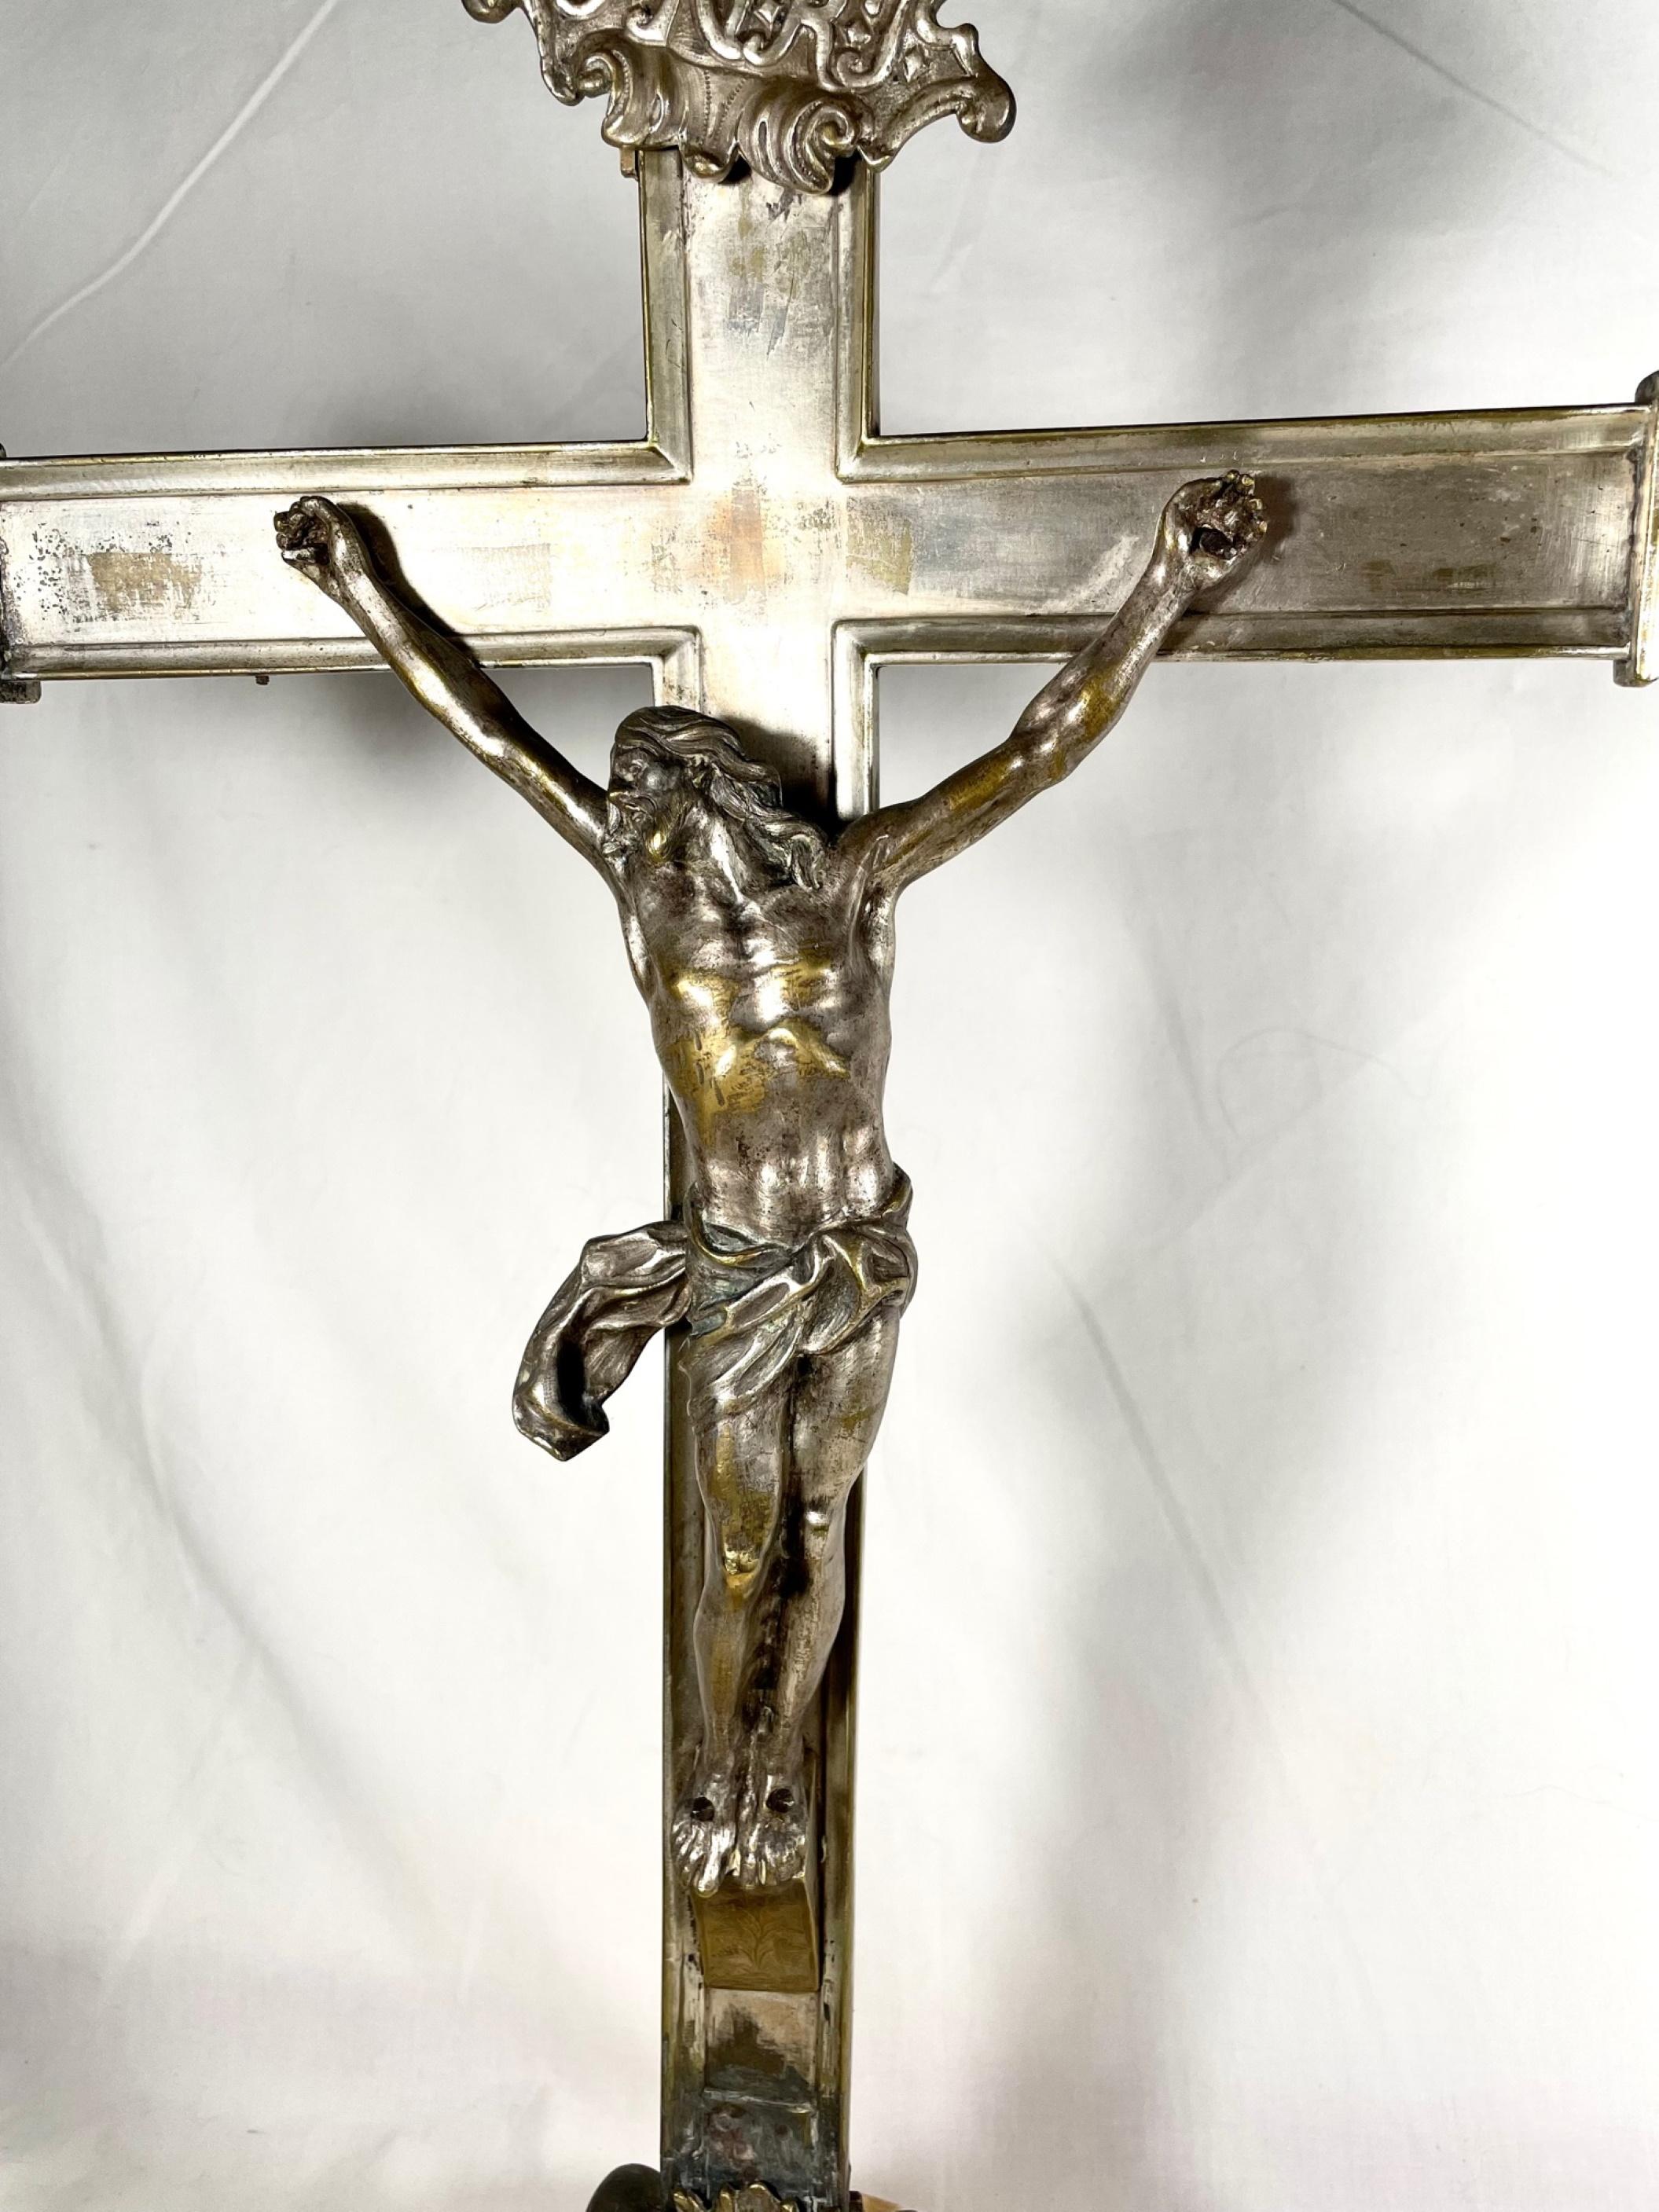 Large Bronze Altar Crucifix 19th Century After Giambologna of Florence.

This antique silvered bronze crucifix is a rare and beautiful devotional object. Cristo Morto, the figure of Christ, is cast in bronze after a model by Giambologna